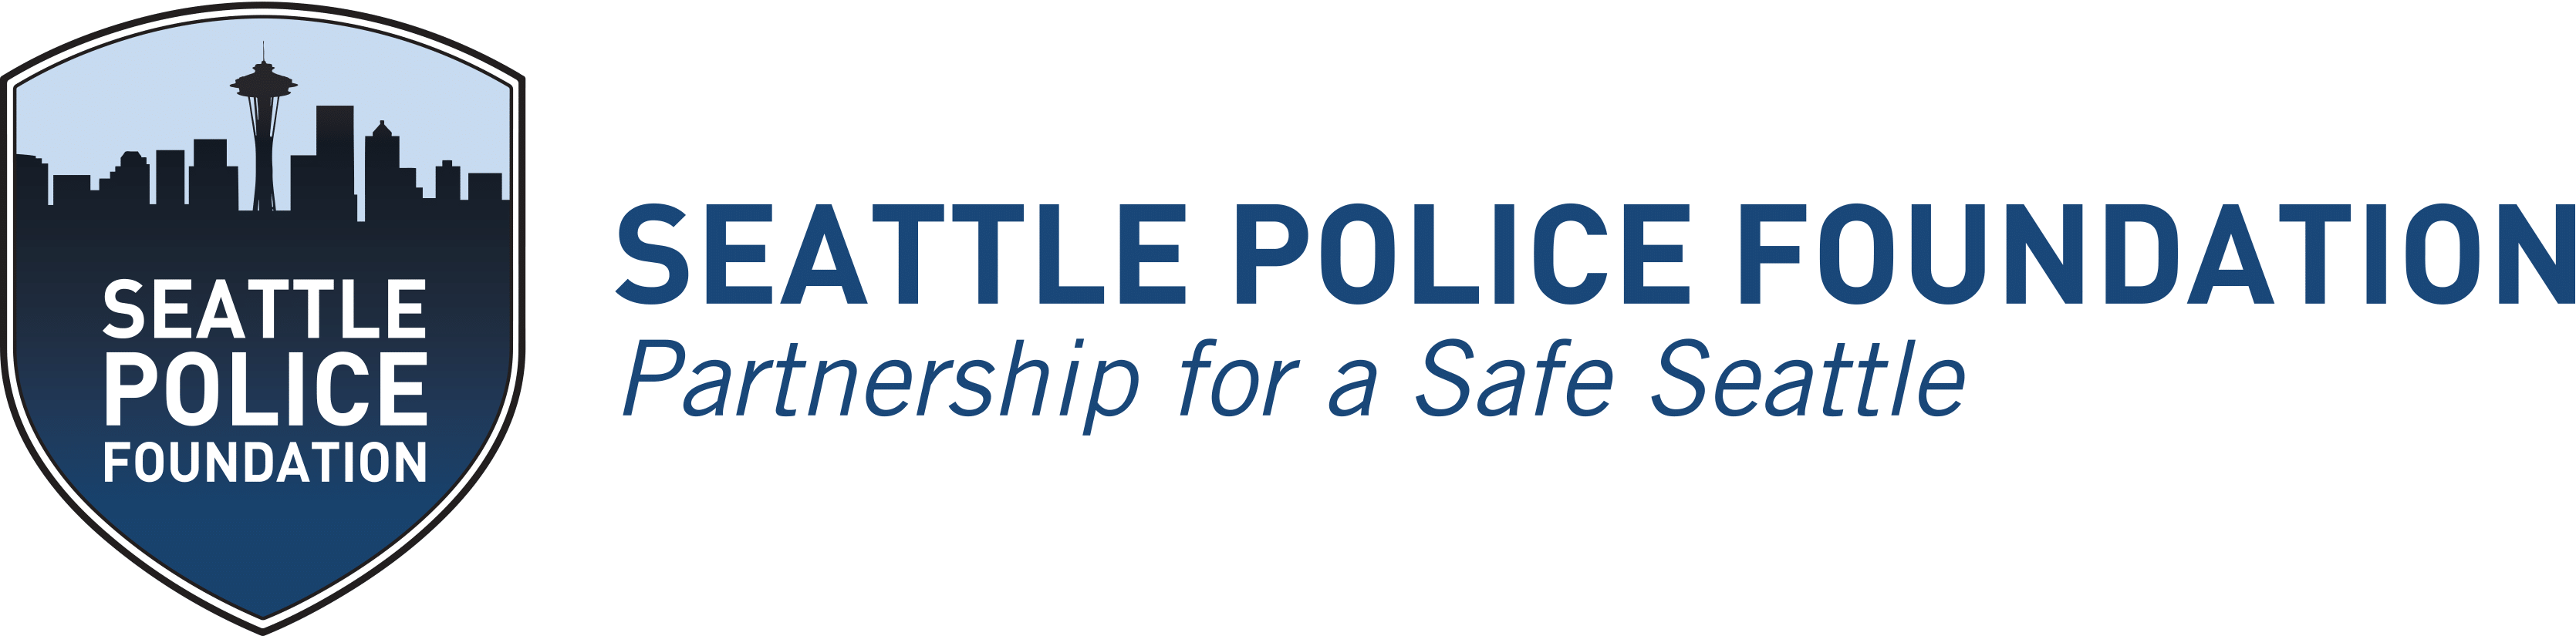 Seattle Police Foundation